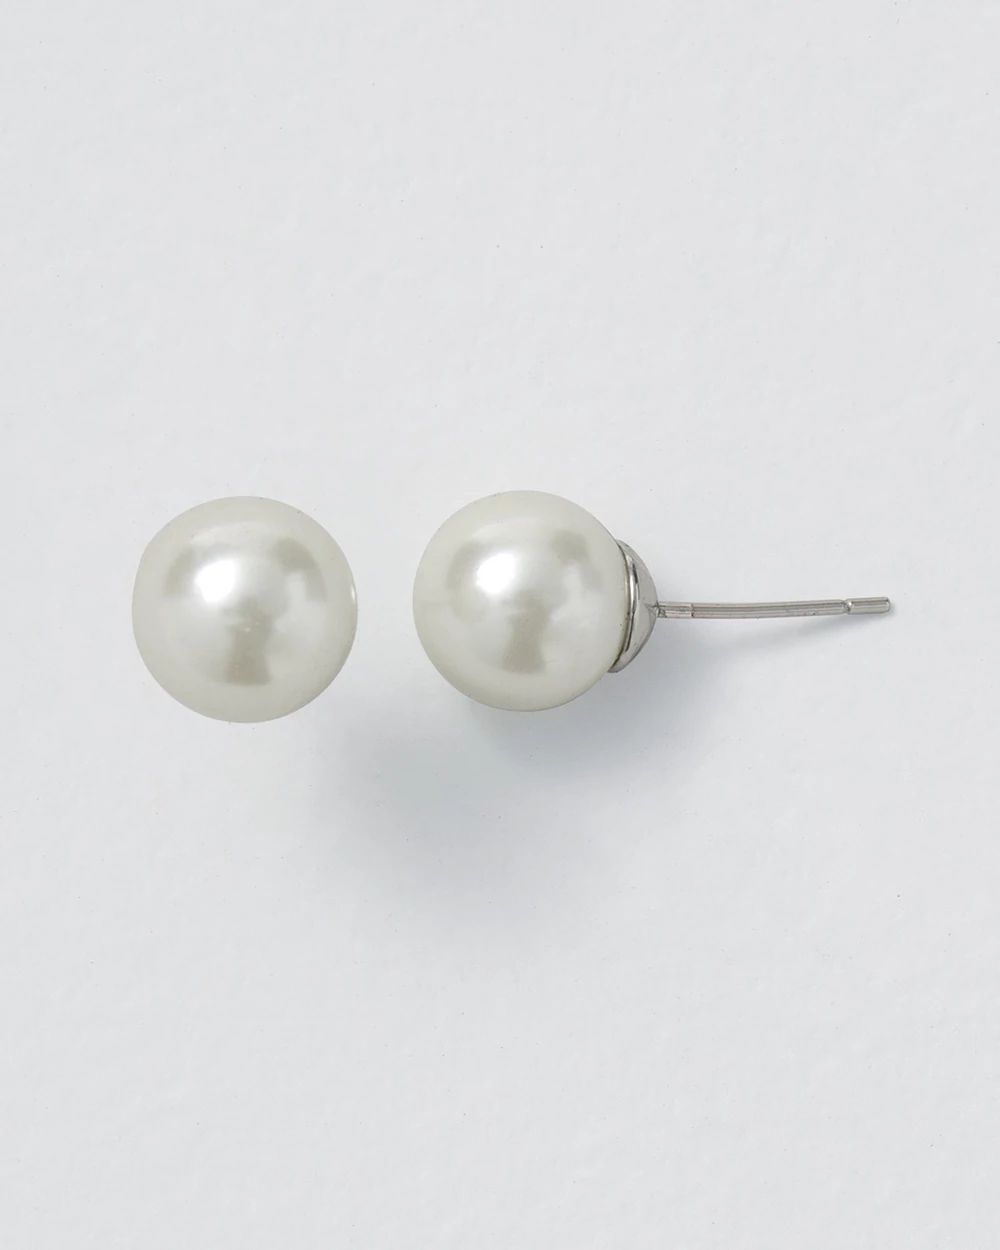 Glass Pearl Stud Earrings click to view larger image.